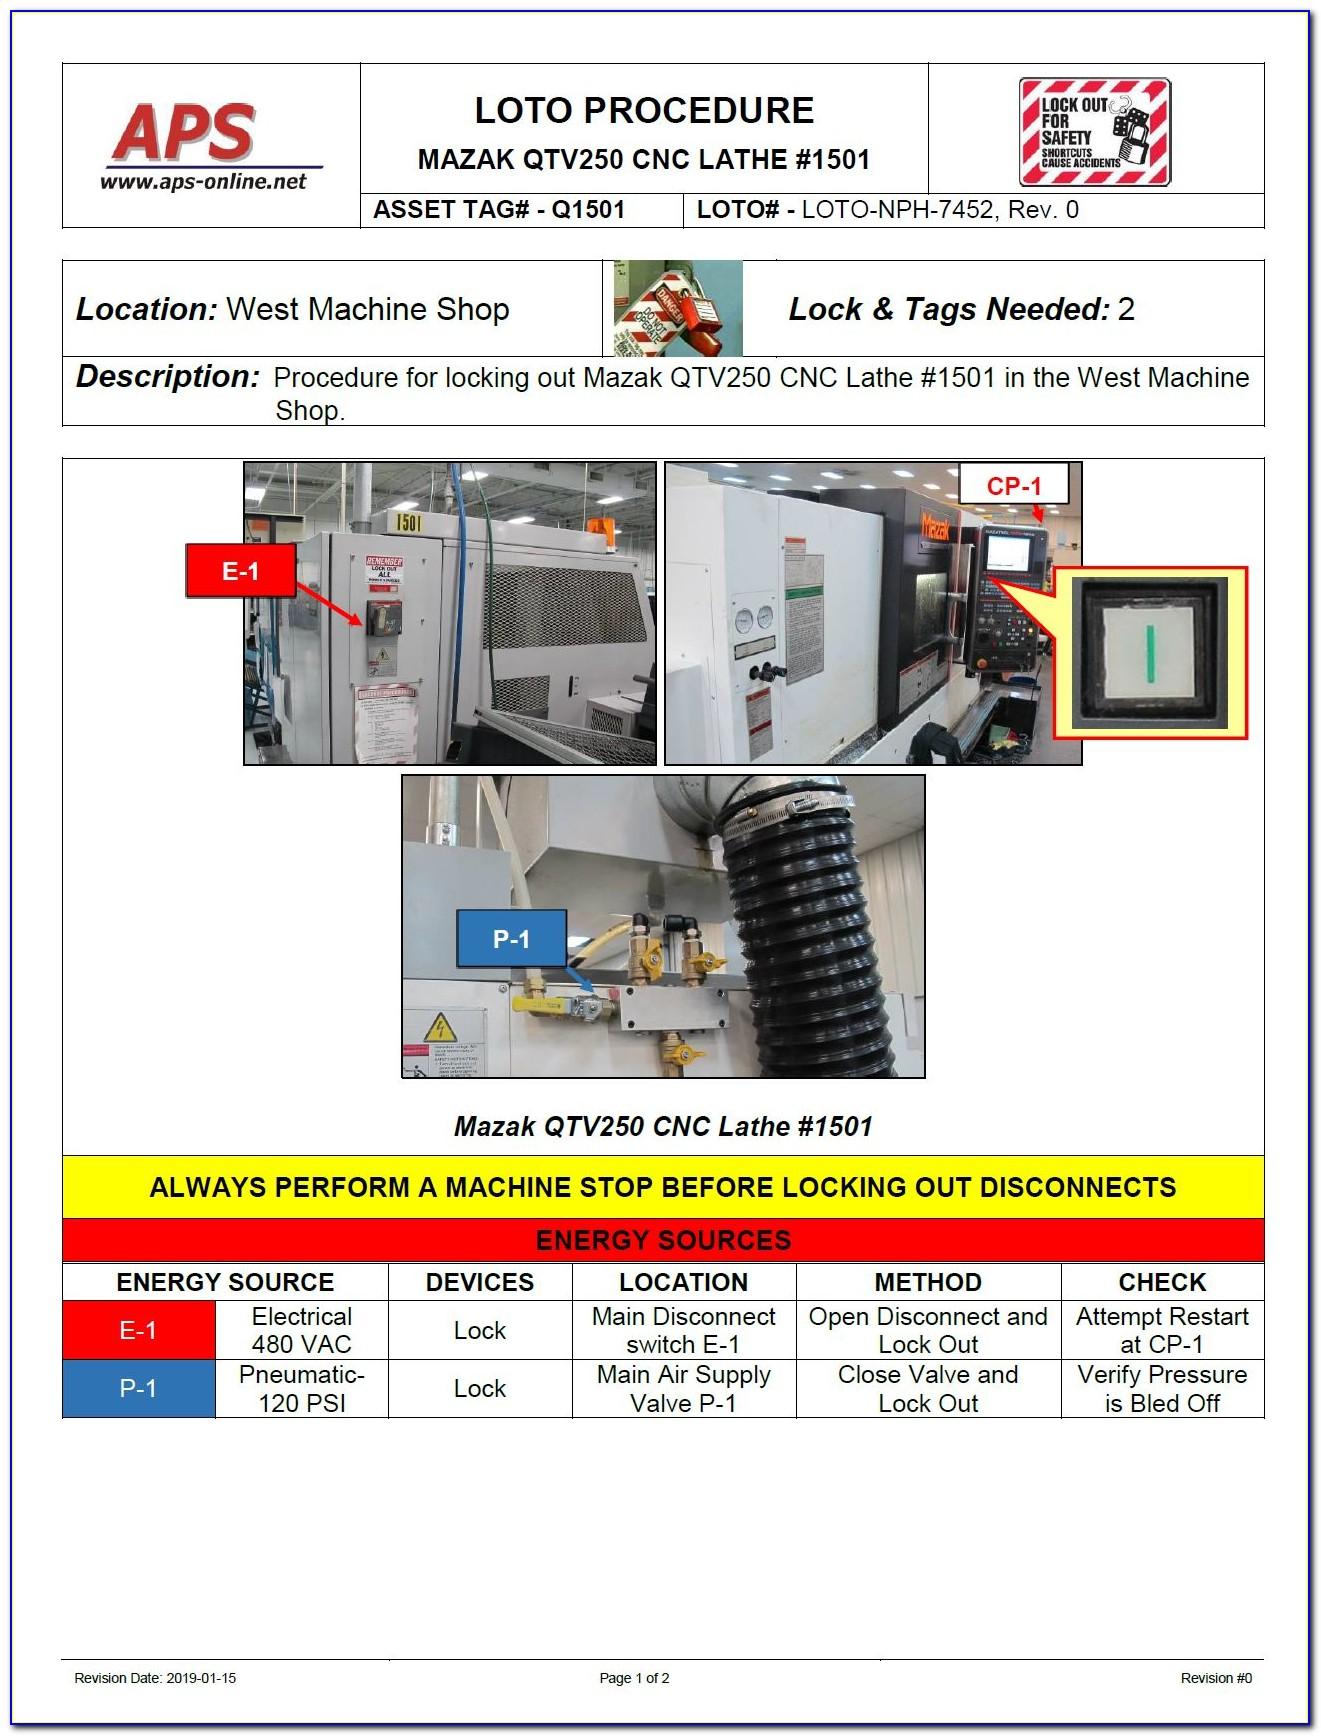 Lockout Tagout Form Template Excel